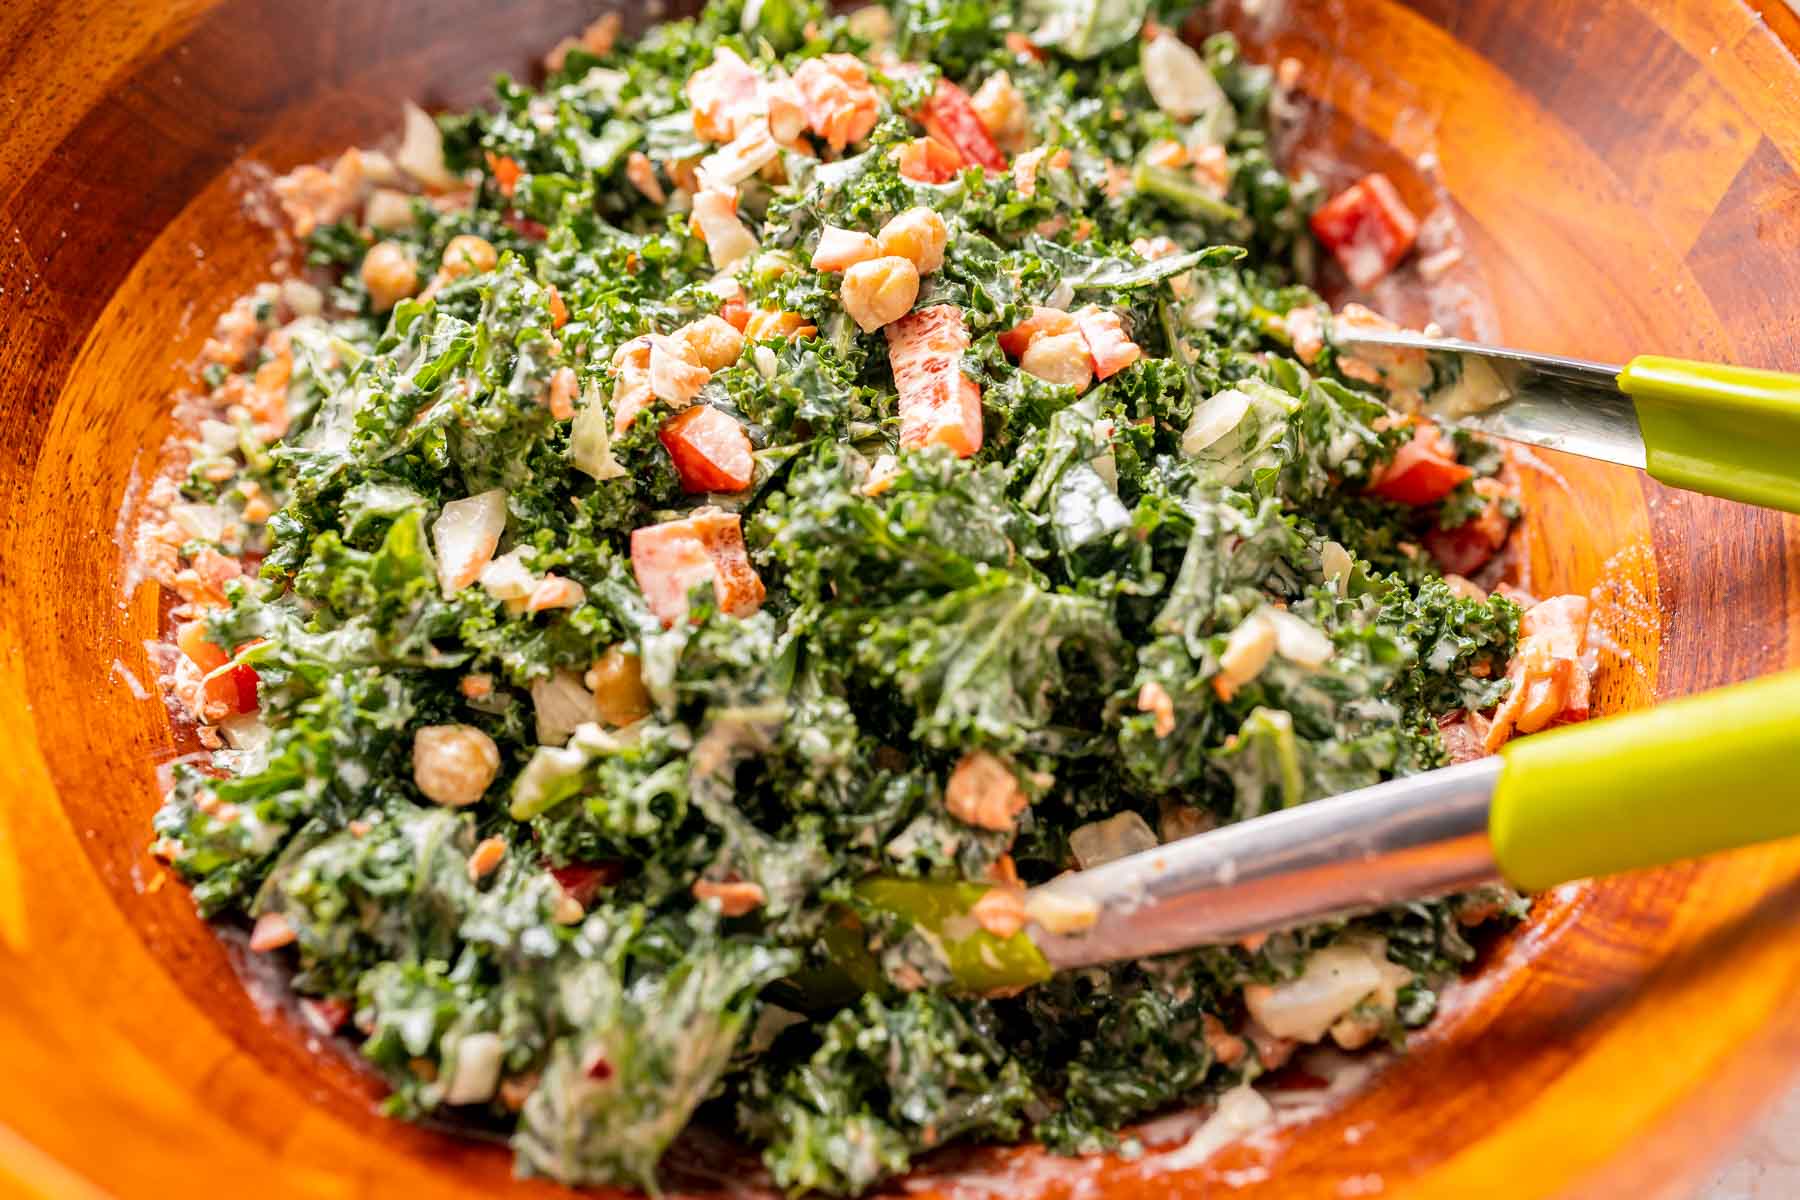 Green tongs reach into a large wood bowl of kale salad.